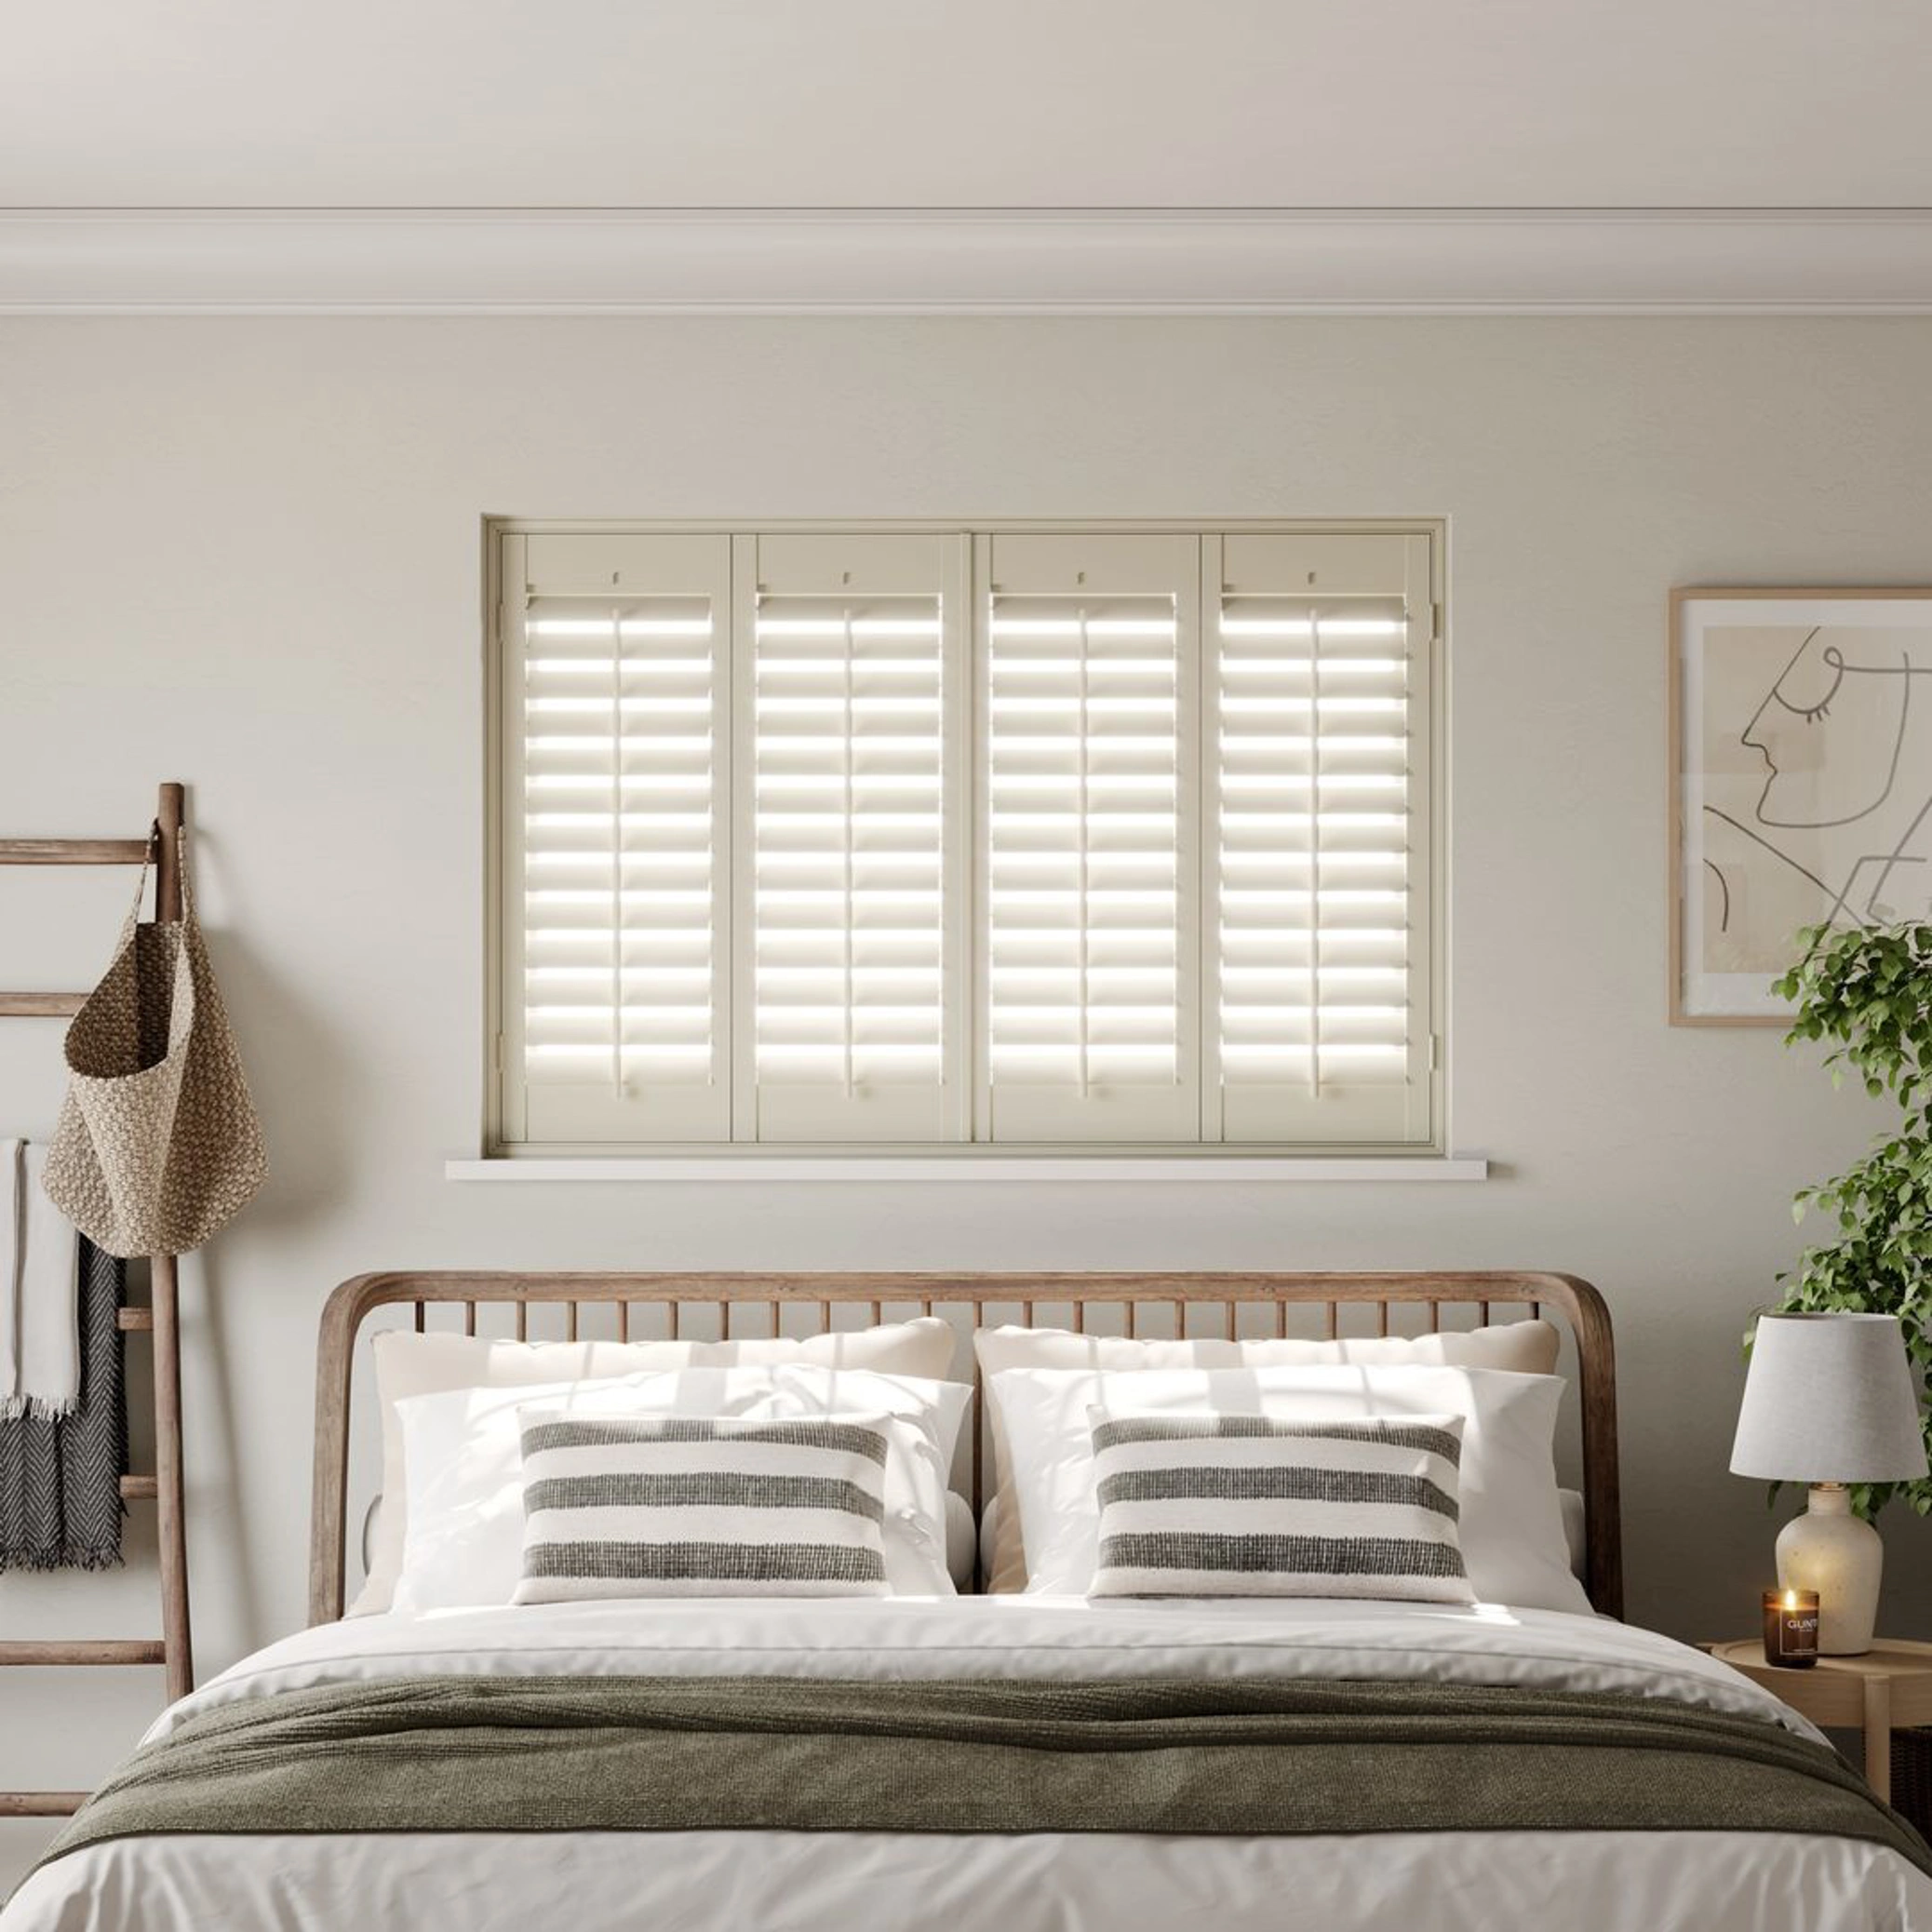 A modern neutral bedroom with Cream full height wooden shutters